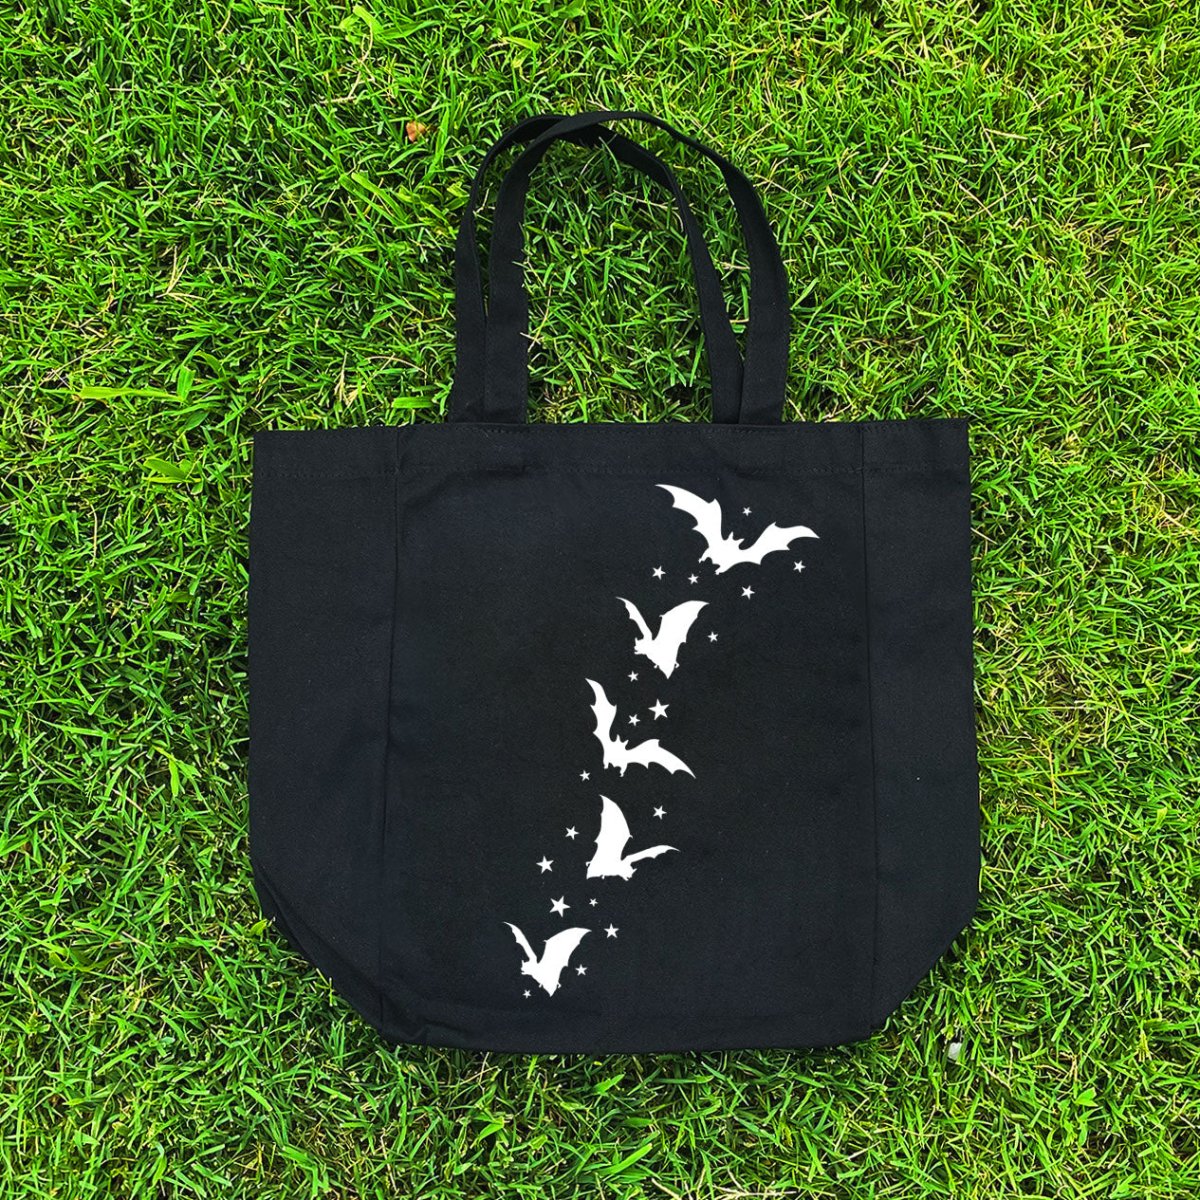 Too Fast | Bats and Stars Canvas Tote Bag